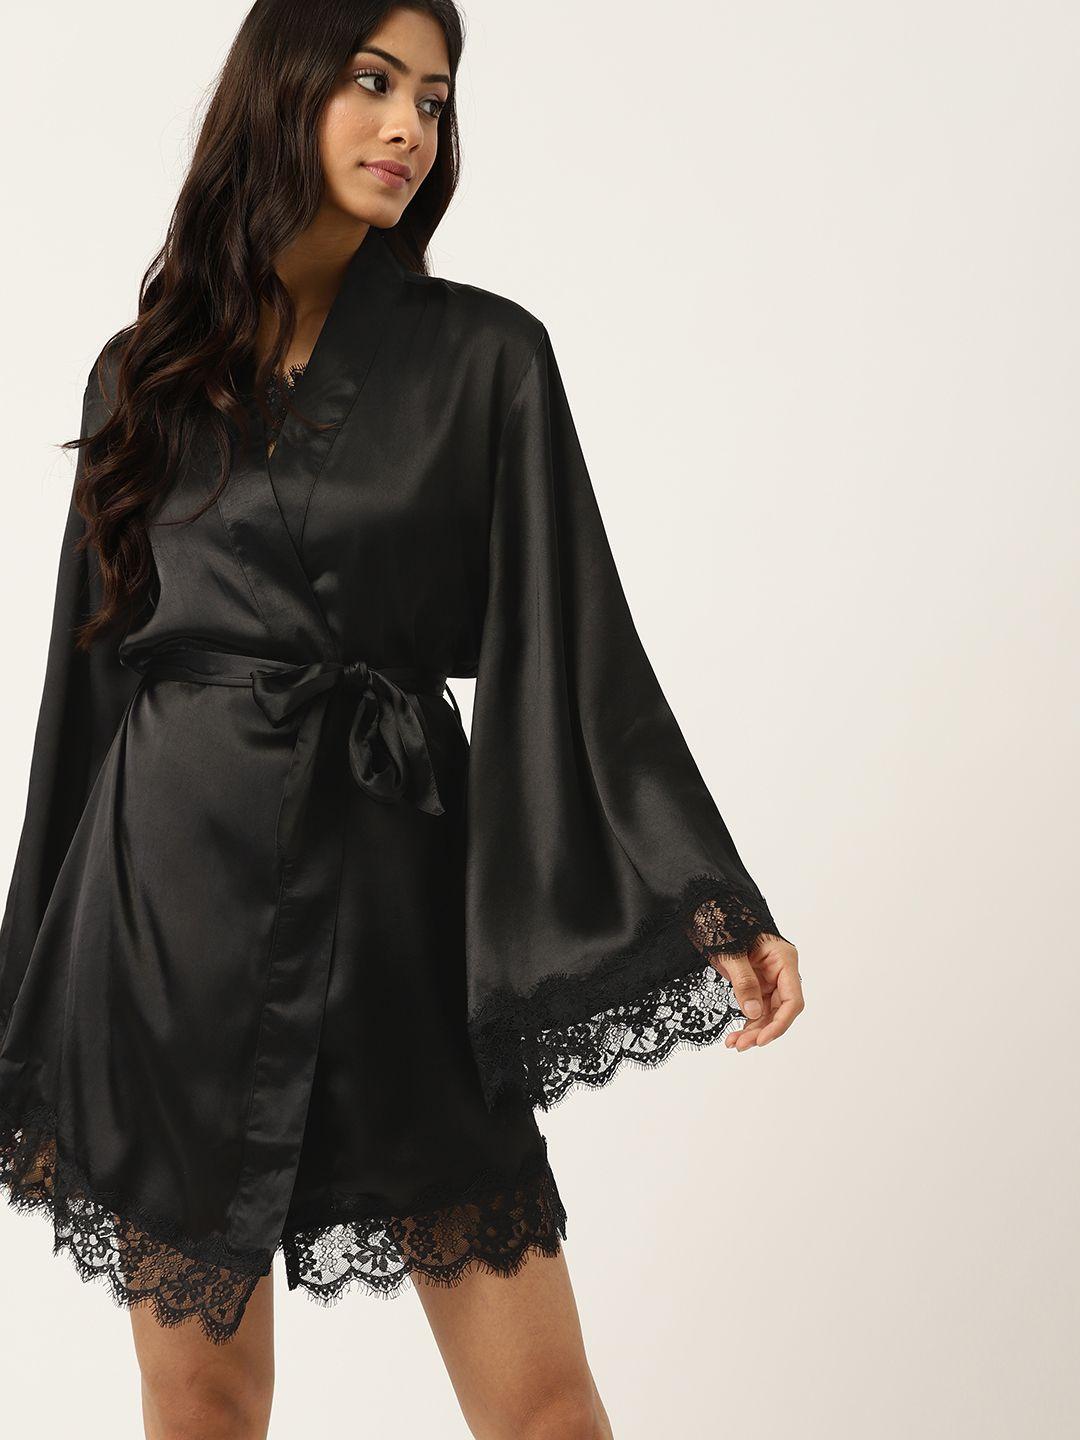 etc-women-black-solid-satin-robe-with-lace-detail